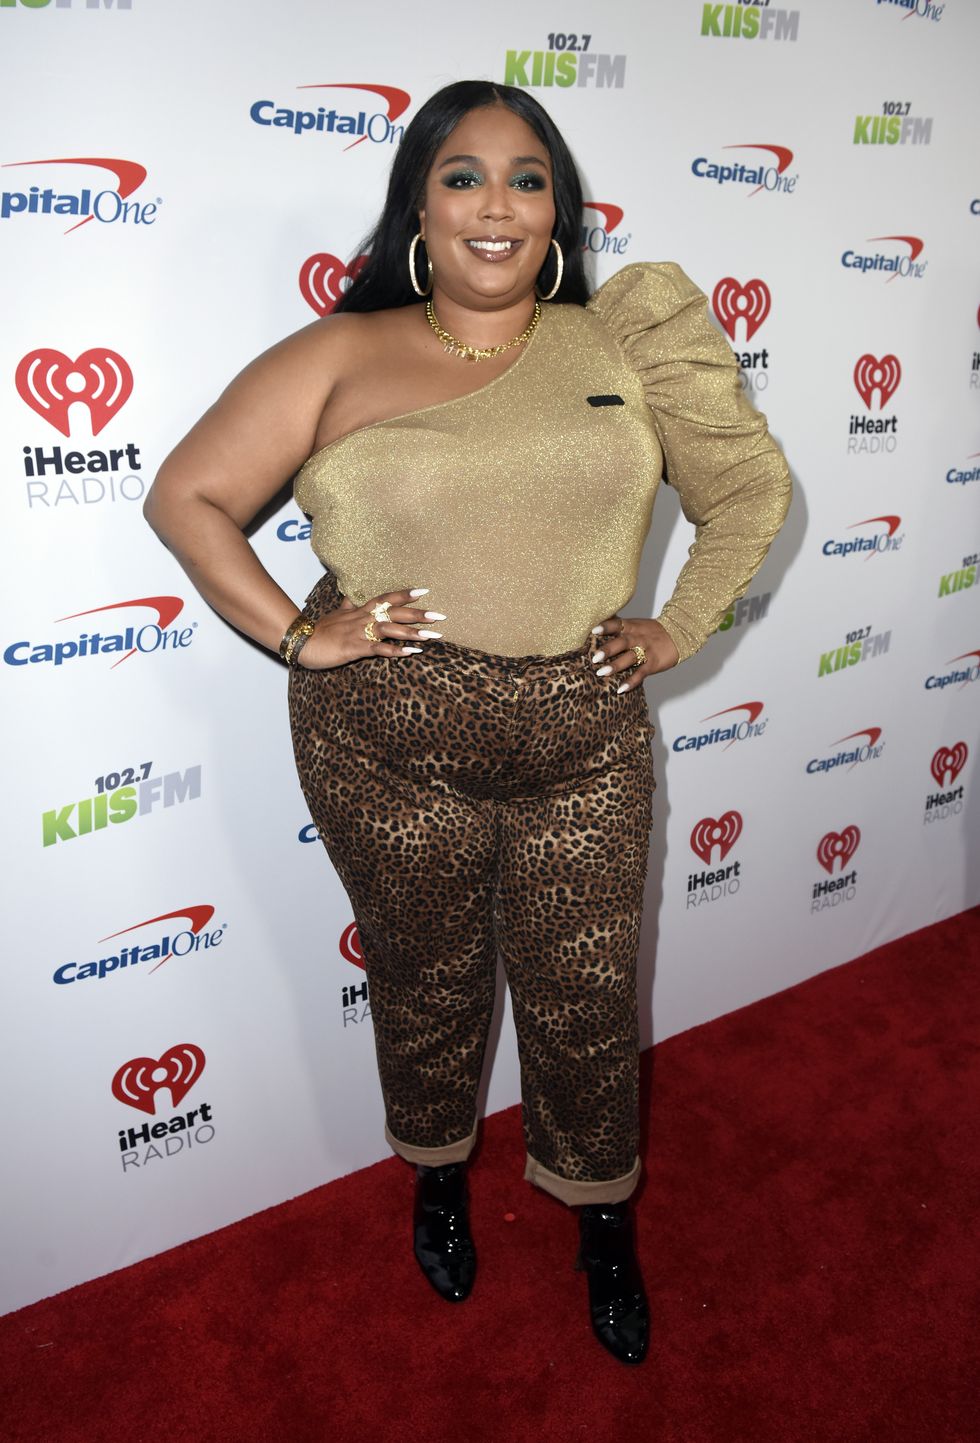 20 Times Lizzo's Outfits Did the Most - Lizzo Style Fashion Album Release